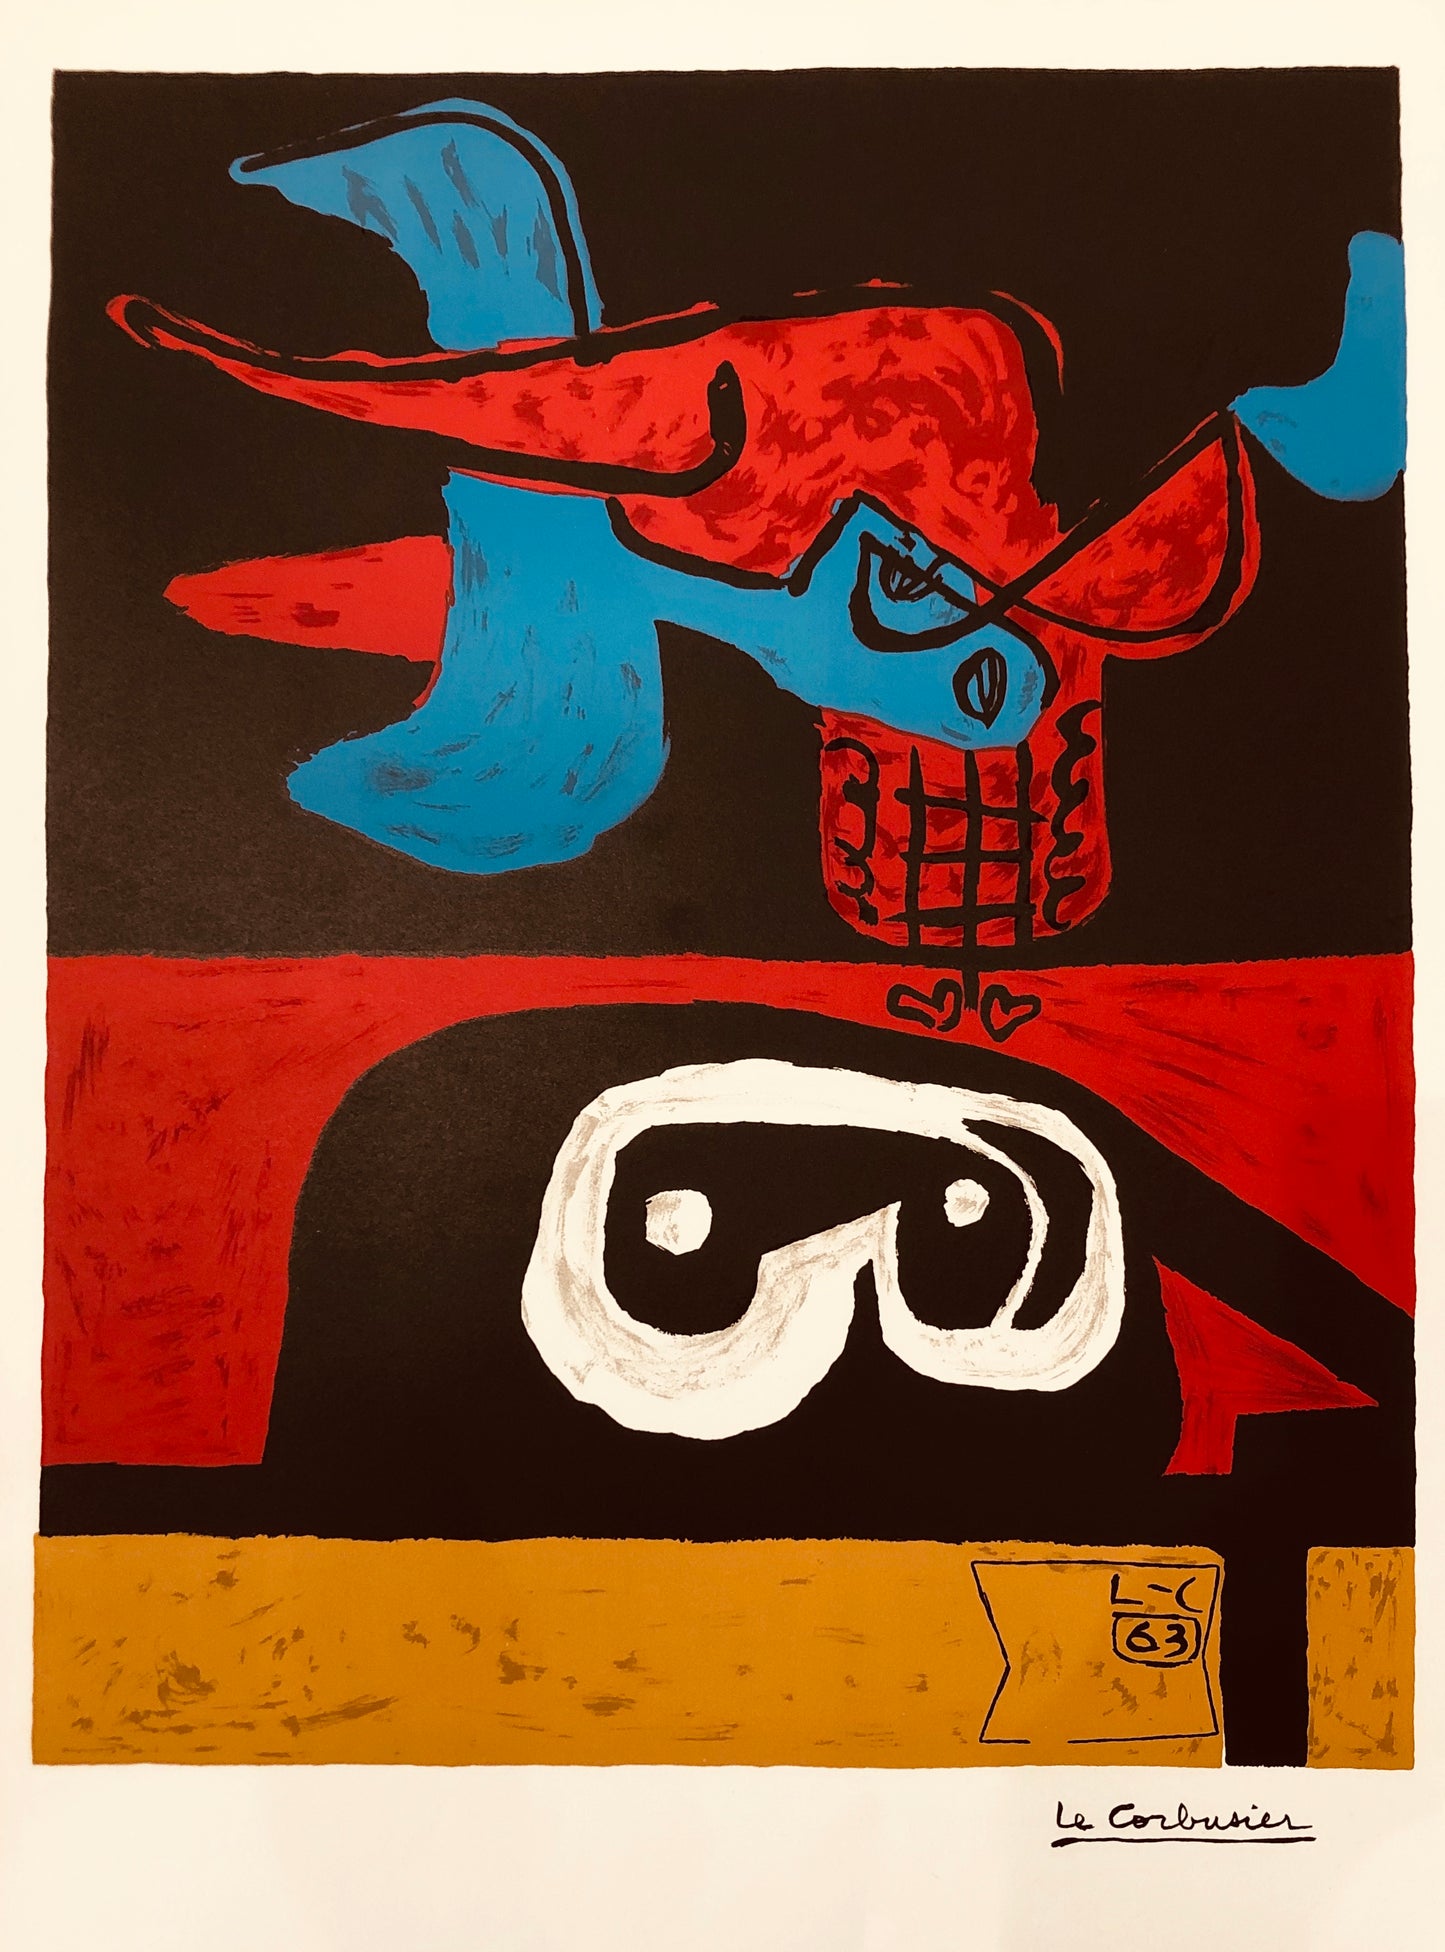 "Otherwordly" by Le Corbusier, 1963 - Mourlot Editions - Fine_Art - Poster - Lithograph - Wall Art - Vintage - Prints - Original